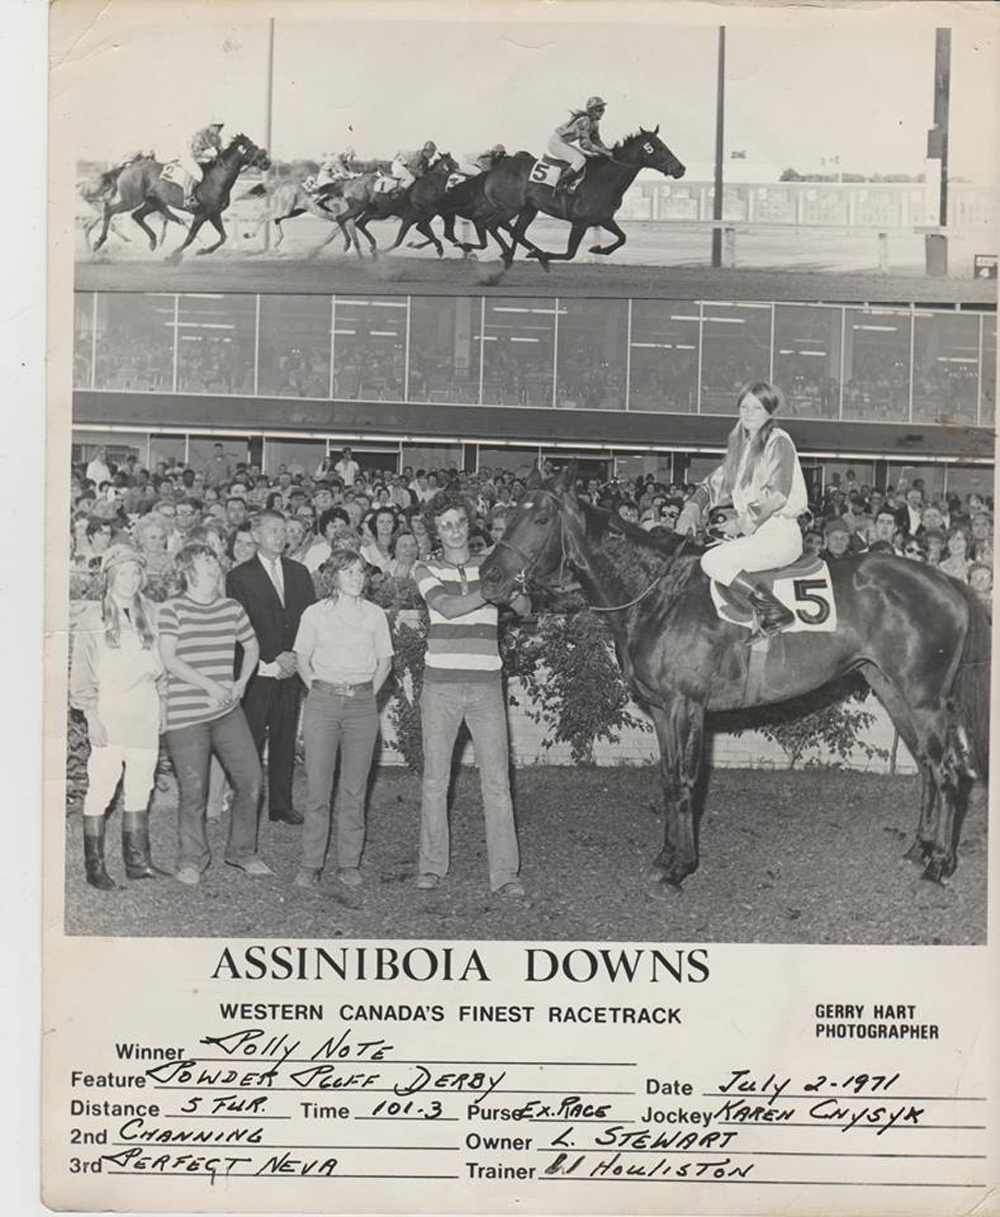 Joan finishes second to Karen Chysyk in the 1972 Powder Puff Derby.